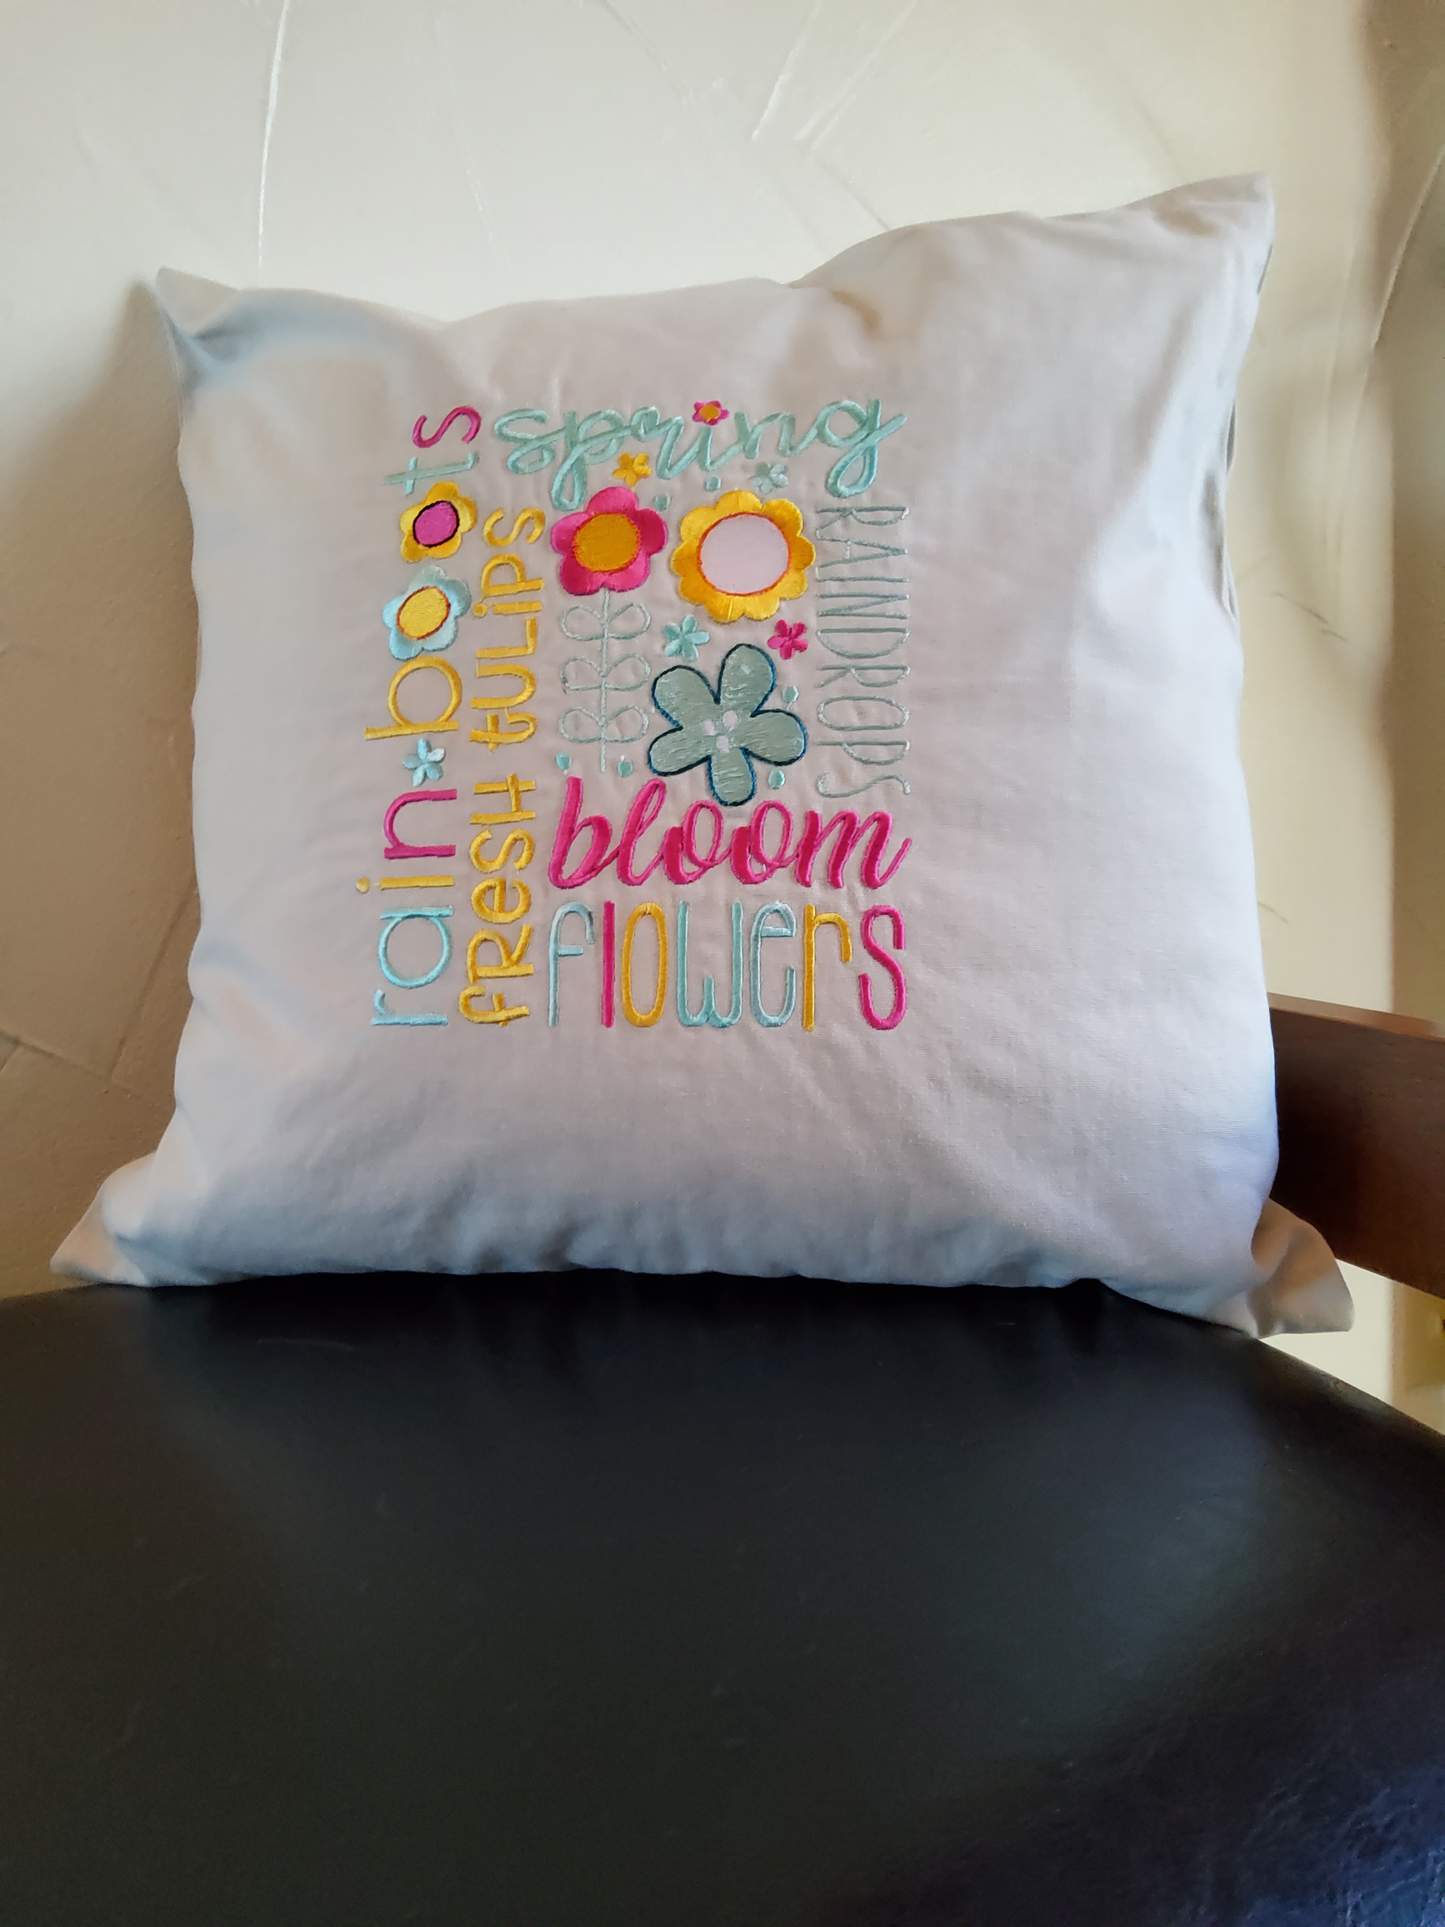 "Spring" Custom Embroidered Decorative Pillow